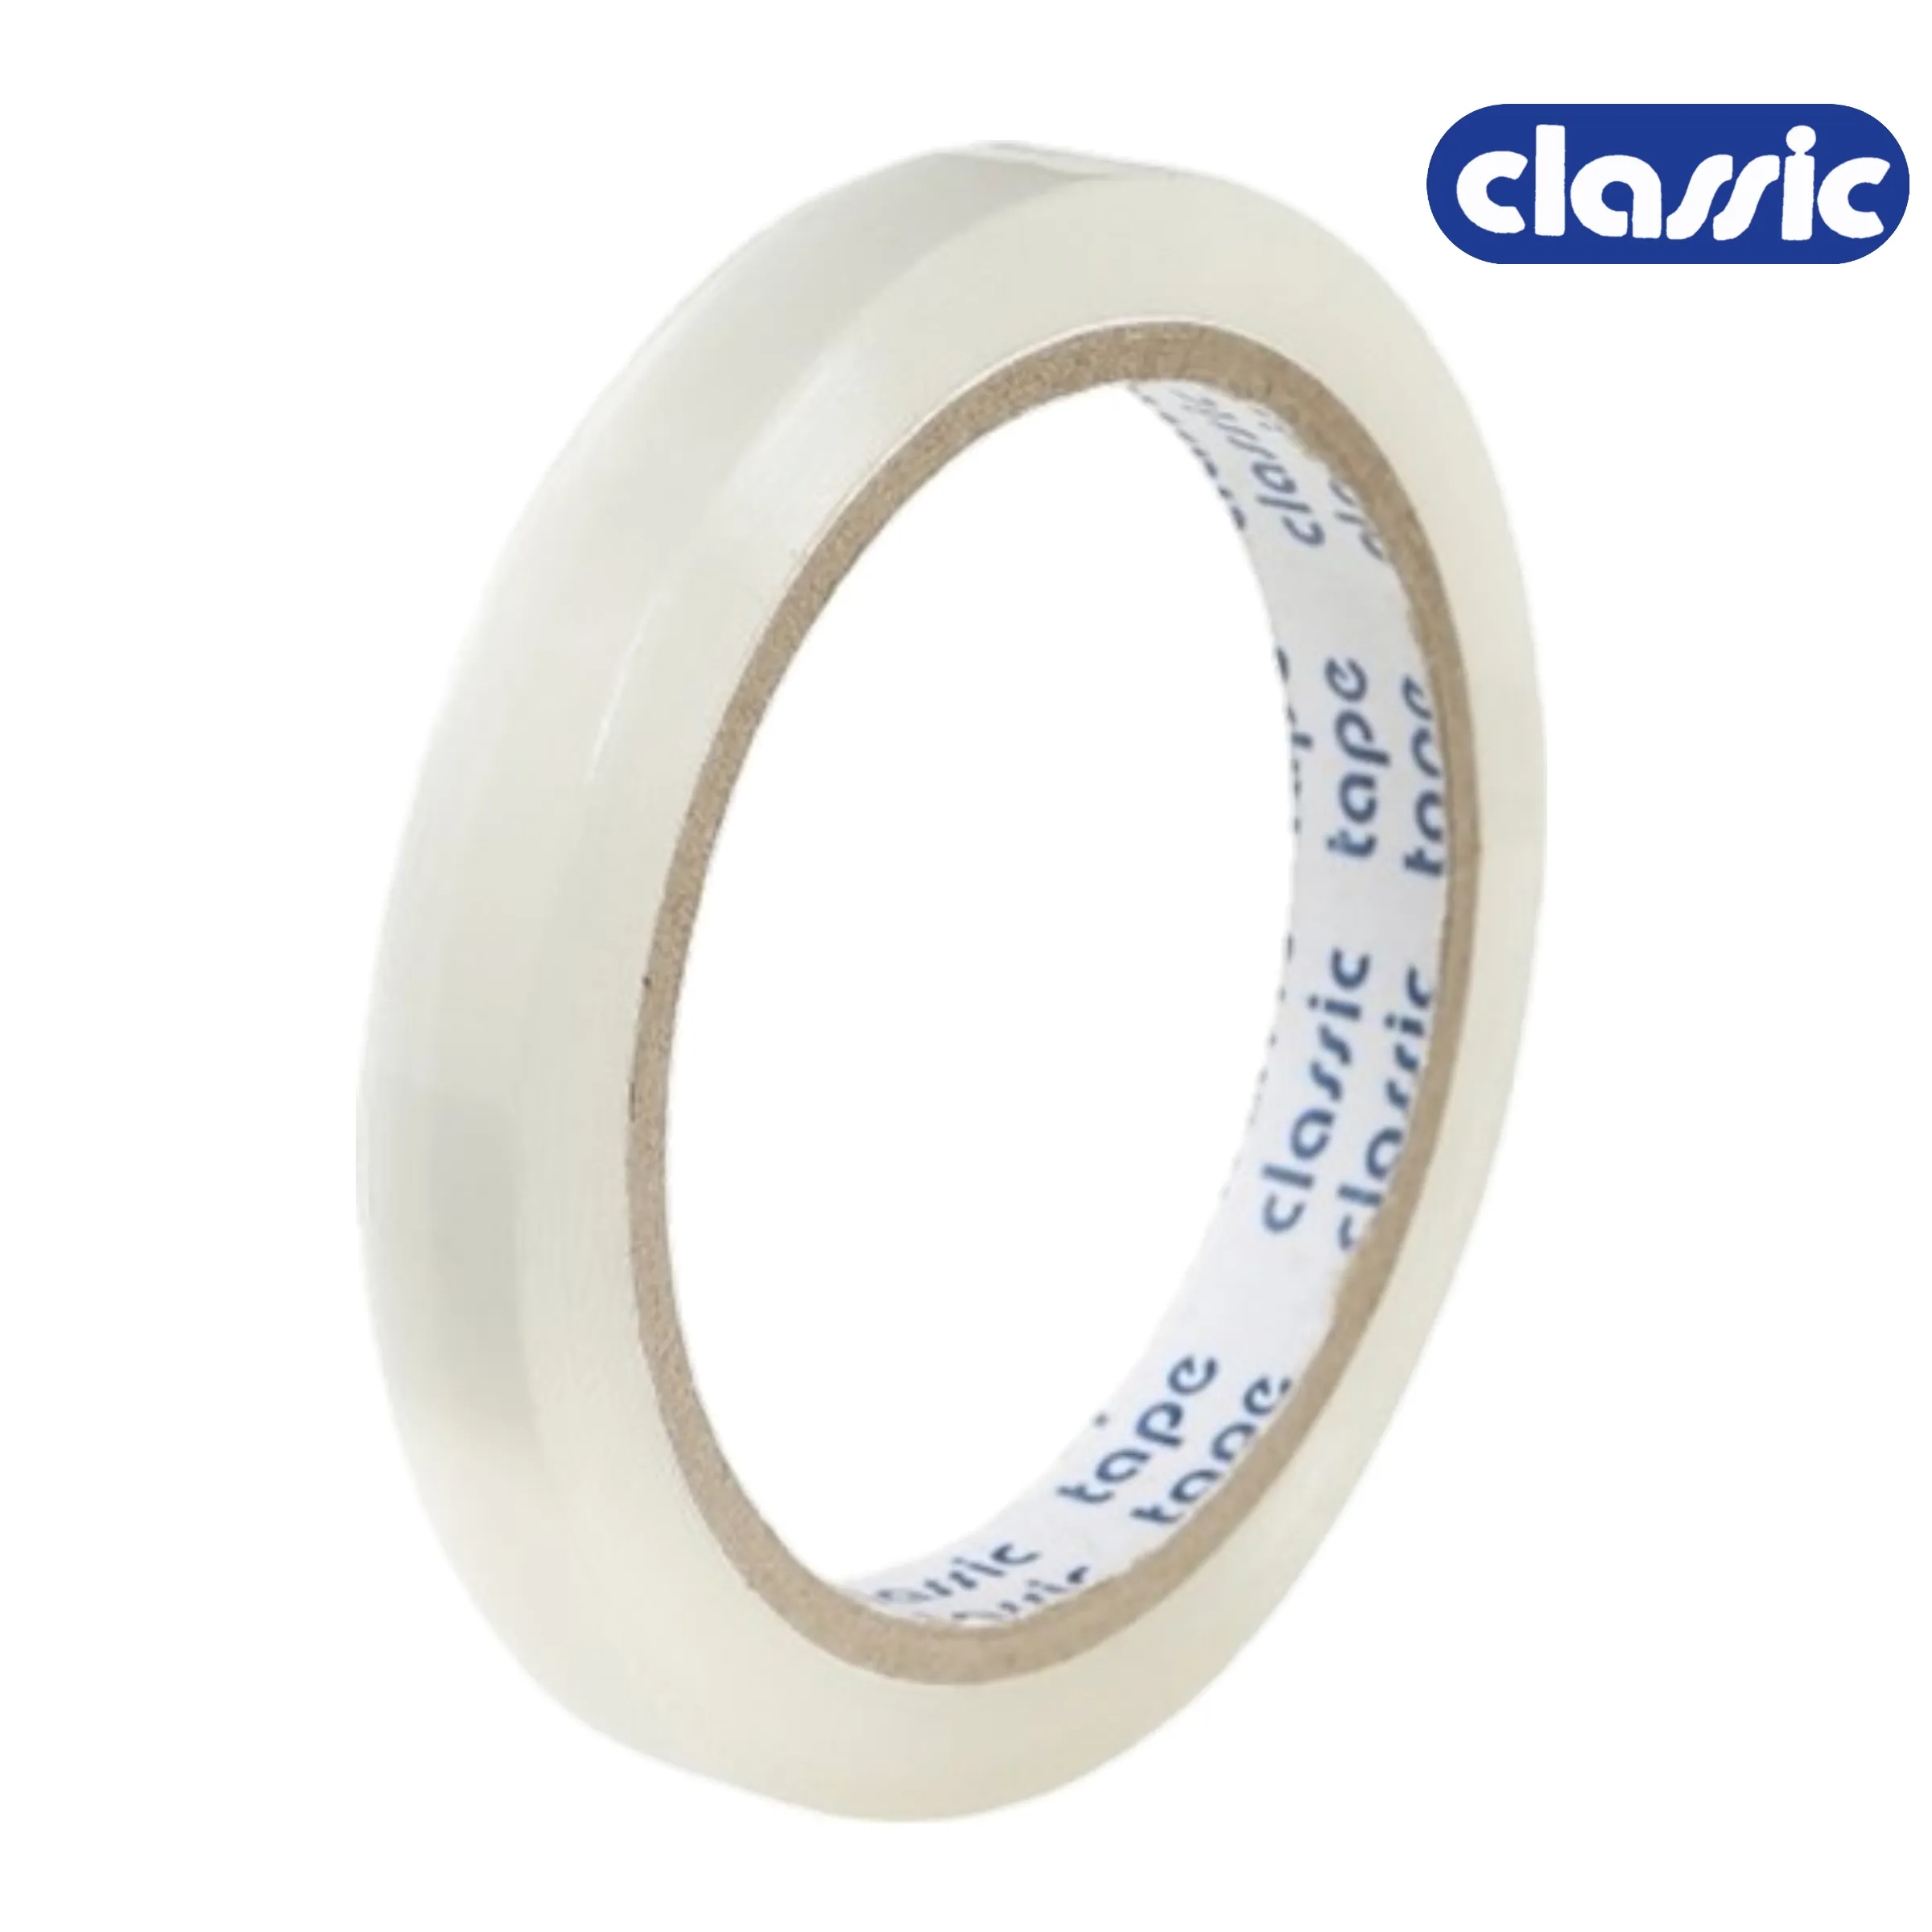 Classic 30 Micron 12 mm Transparent Self Adhesive Tape, Premium Quality, 1 Pack of 6 Roll